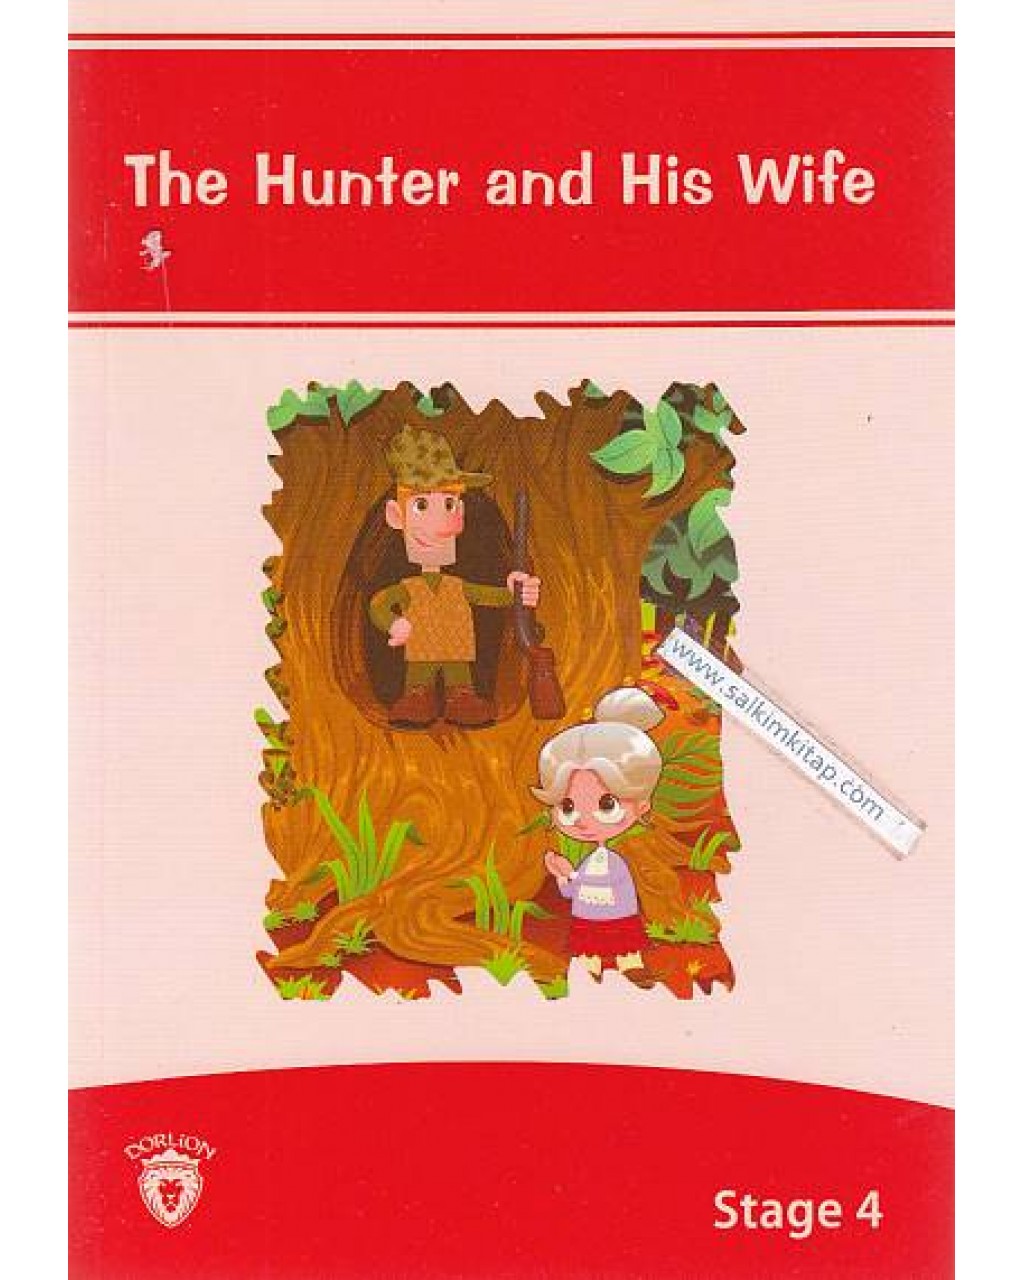 The Hunter and His Wife